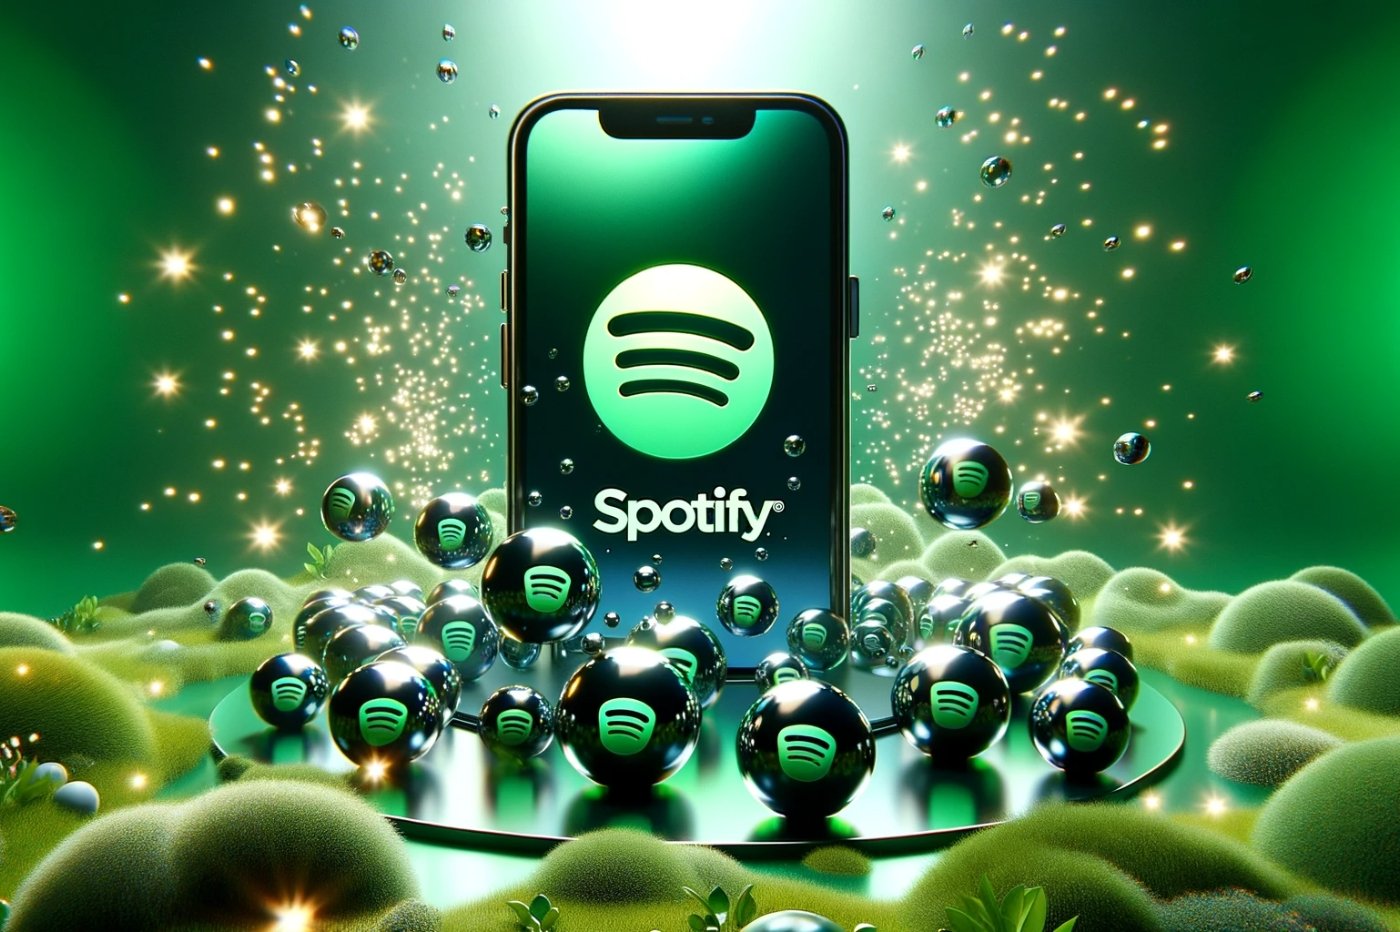 Spotify design by iphon.fr x dall e